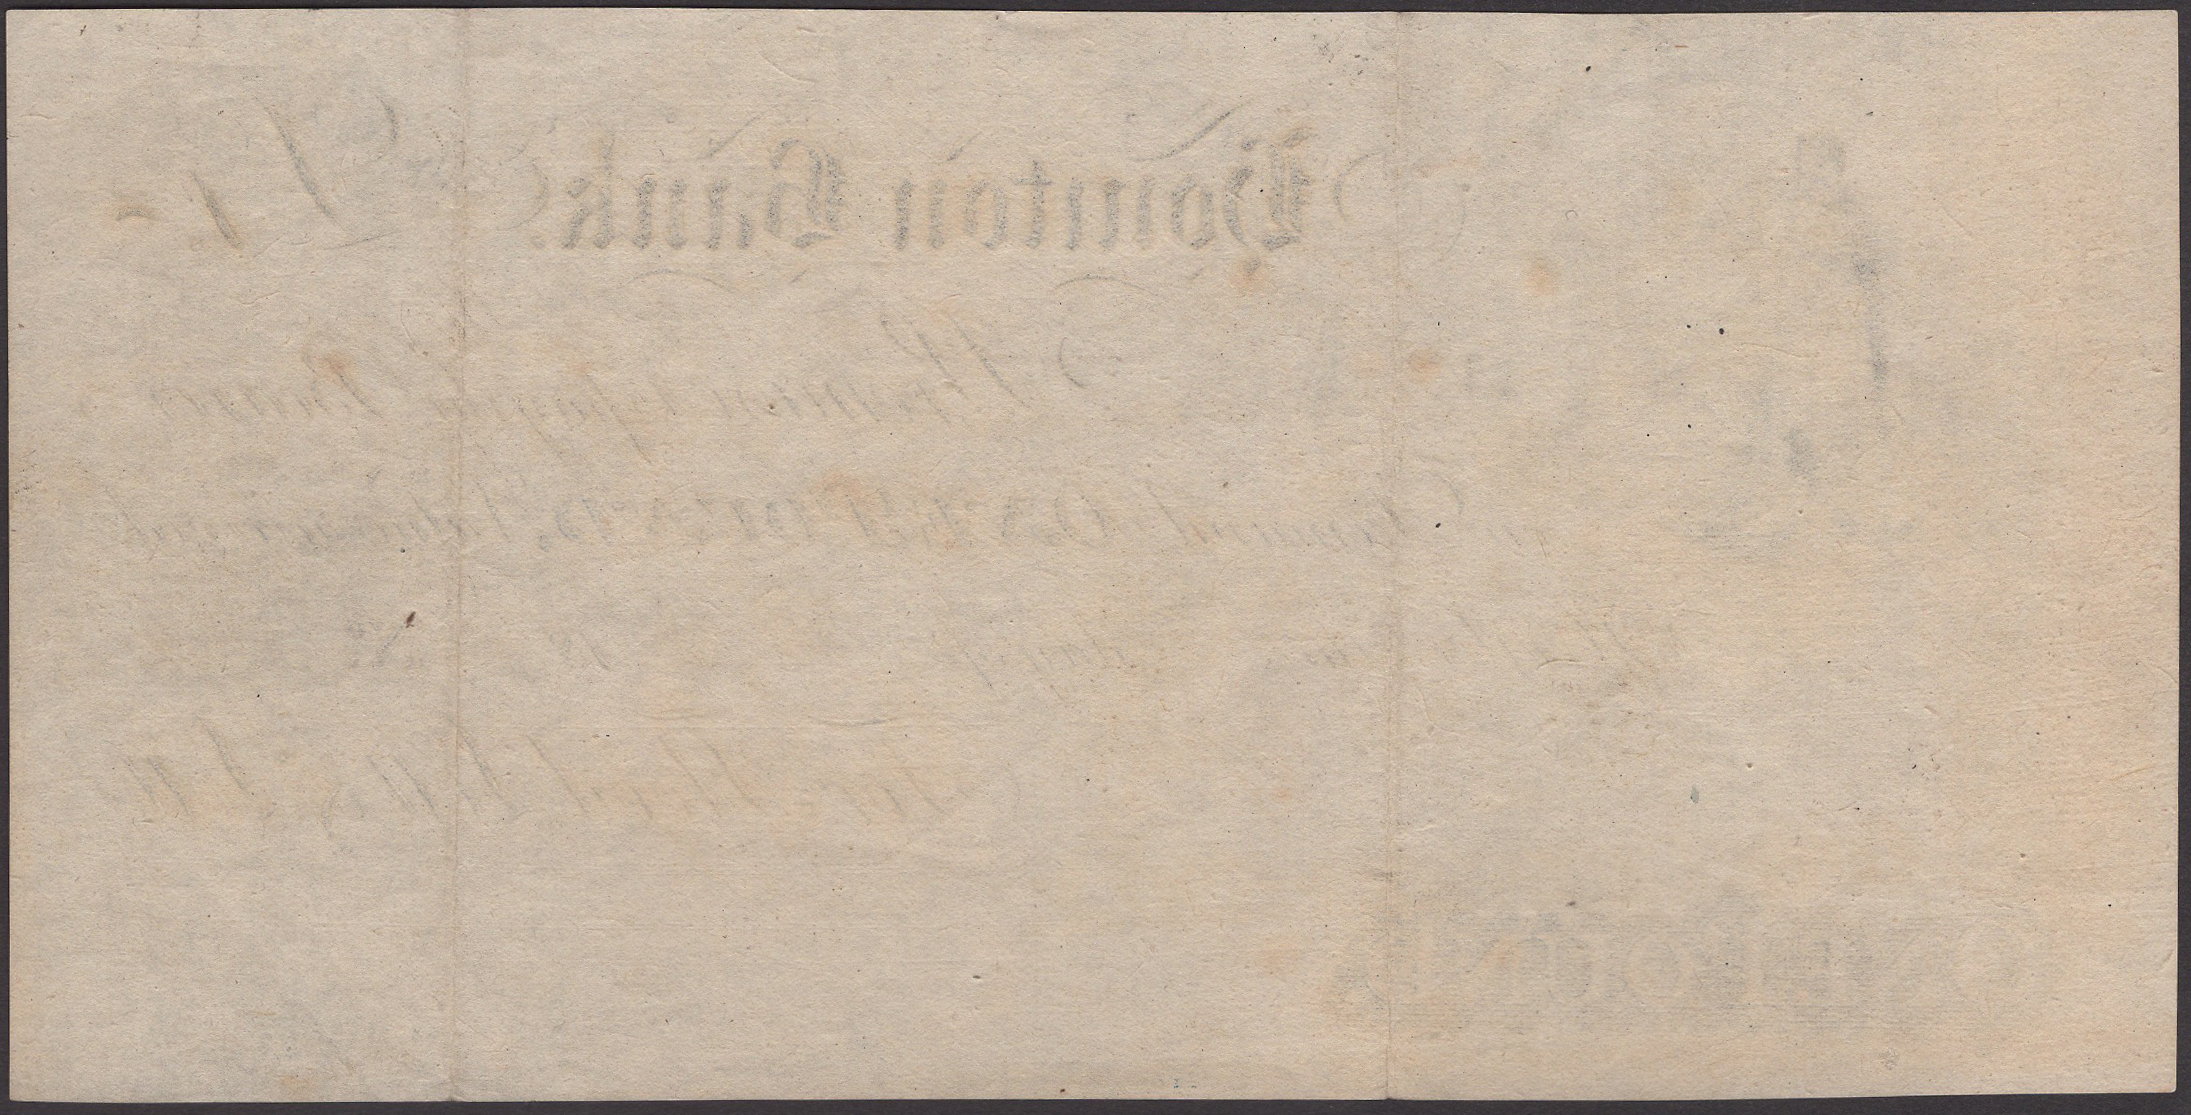 Honiton Bank, for Flood, Lott & lott, proof on paper for Â£1, 18-, no signature or serial num... - Image 2 of 2